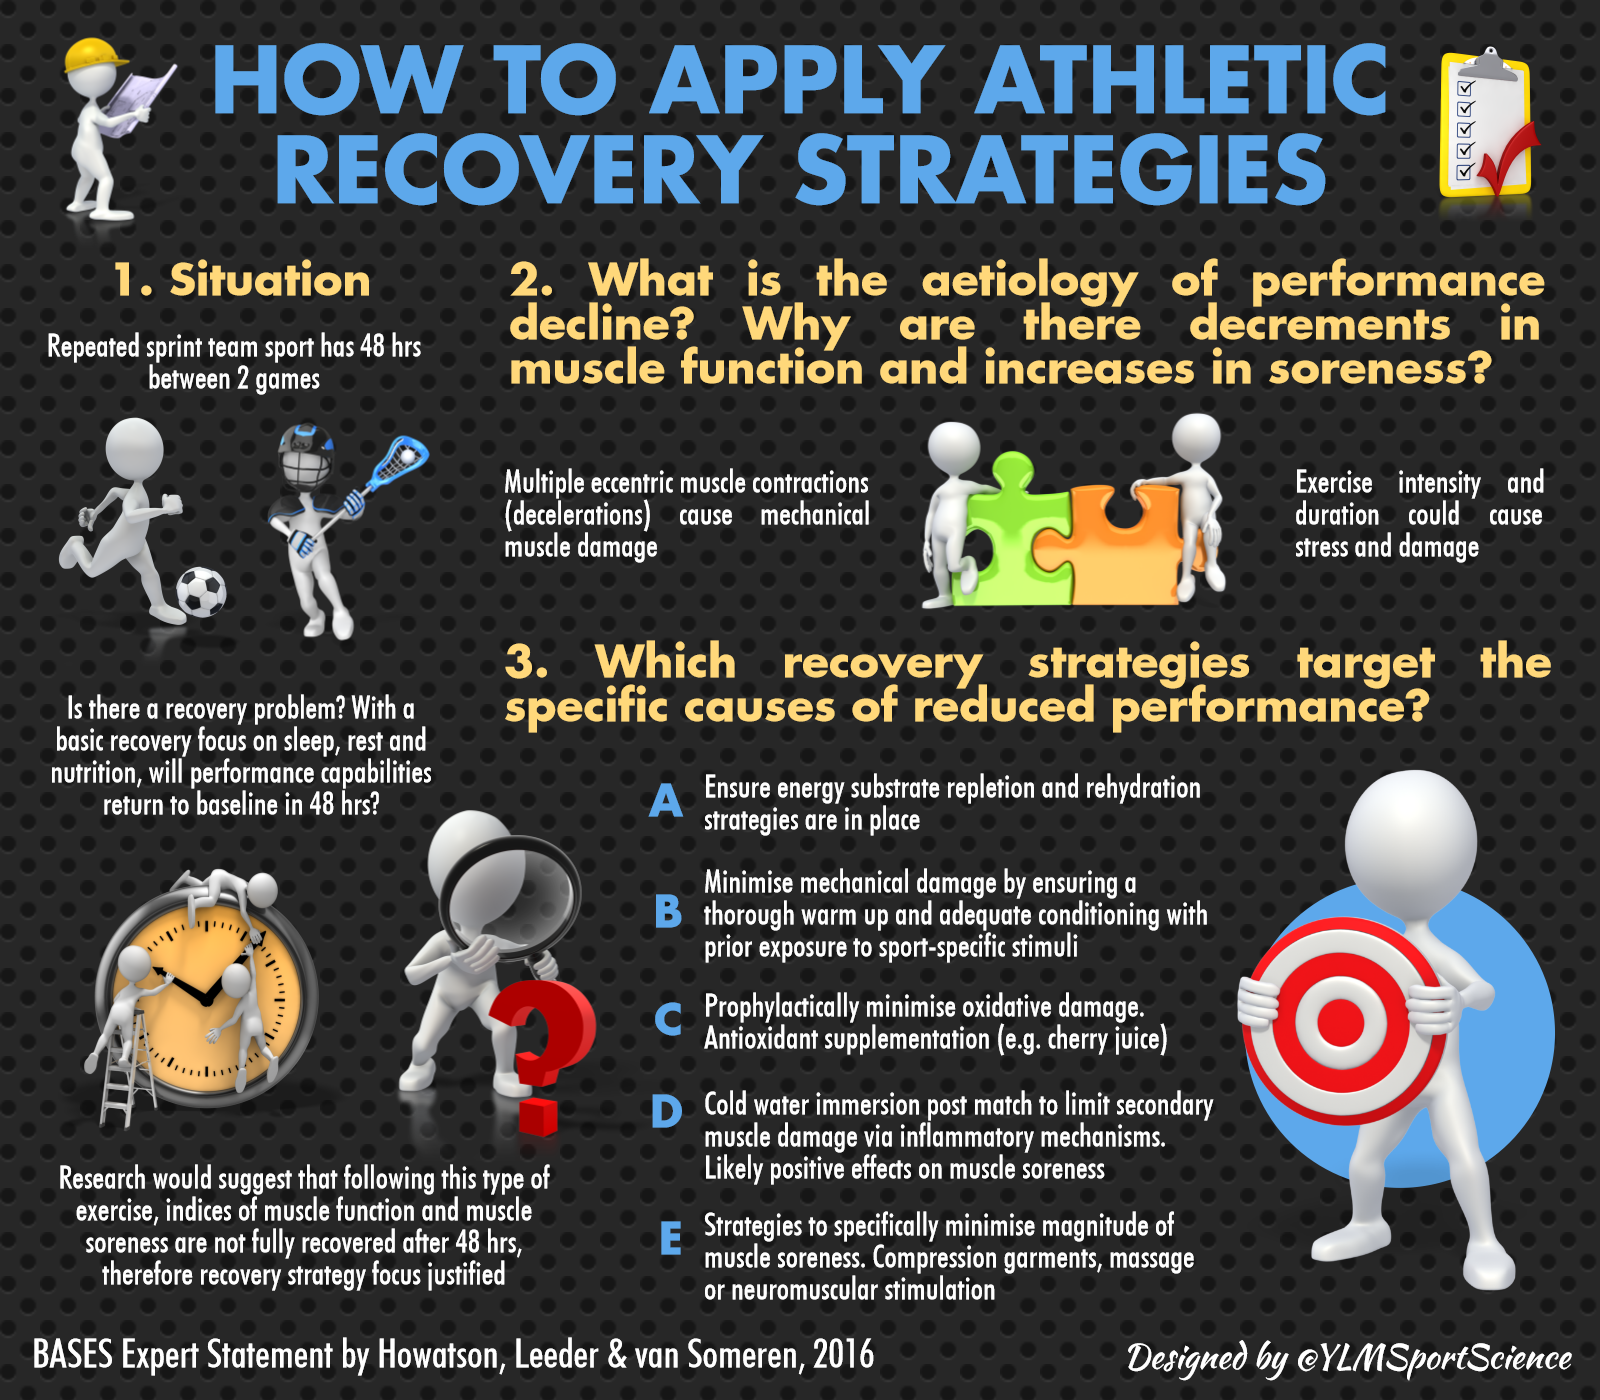 II. Importance of Recovery for Athletes